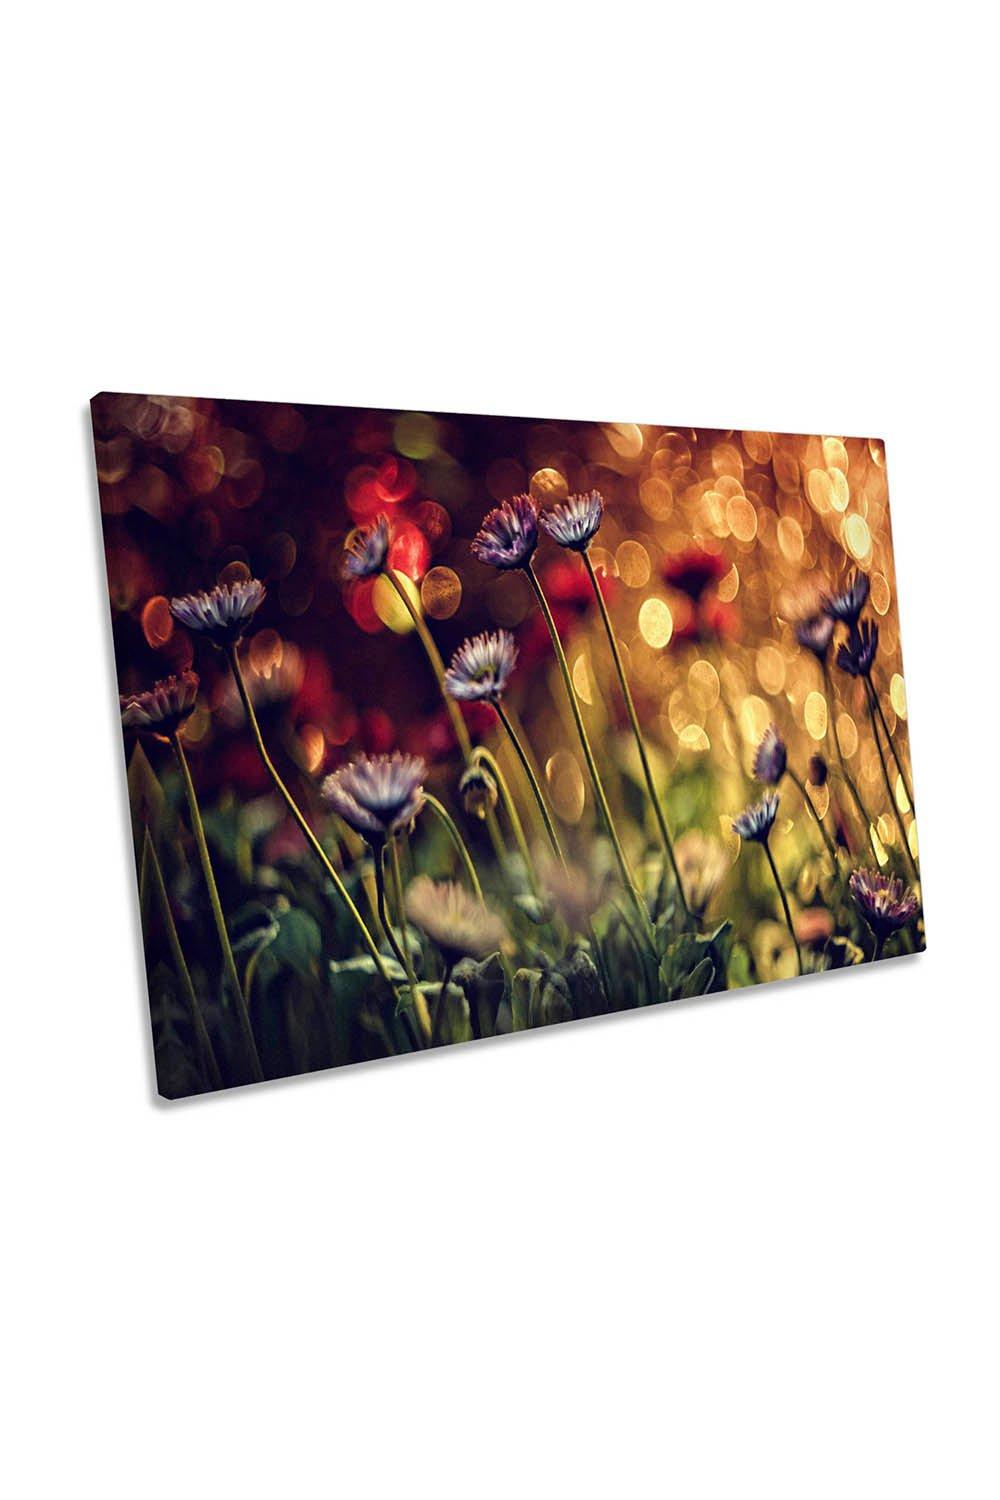 Summer Flowers Floral Sunlight Canvas Wall Art Picture Print